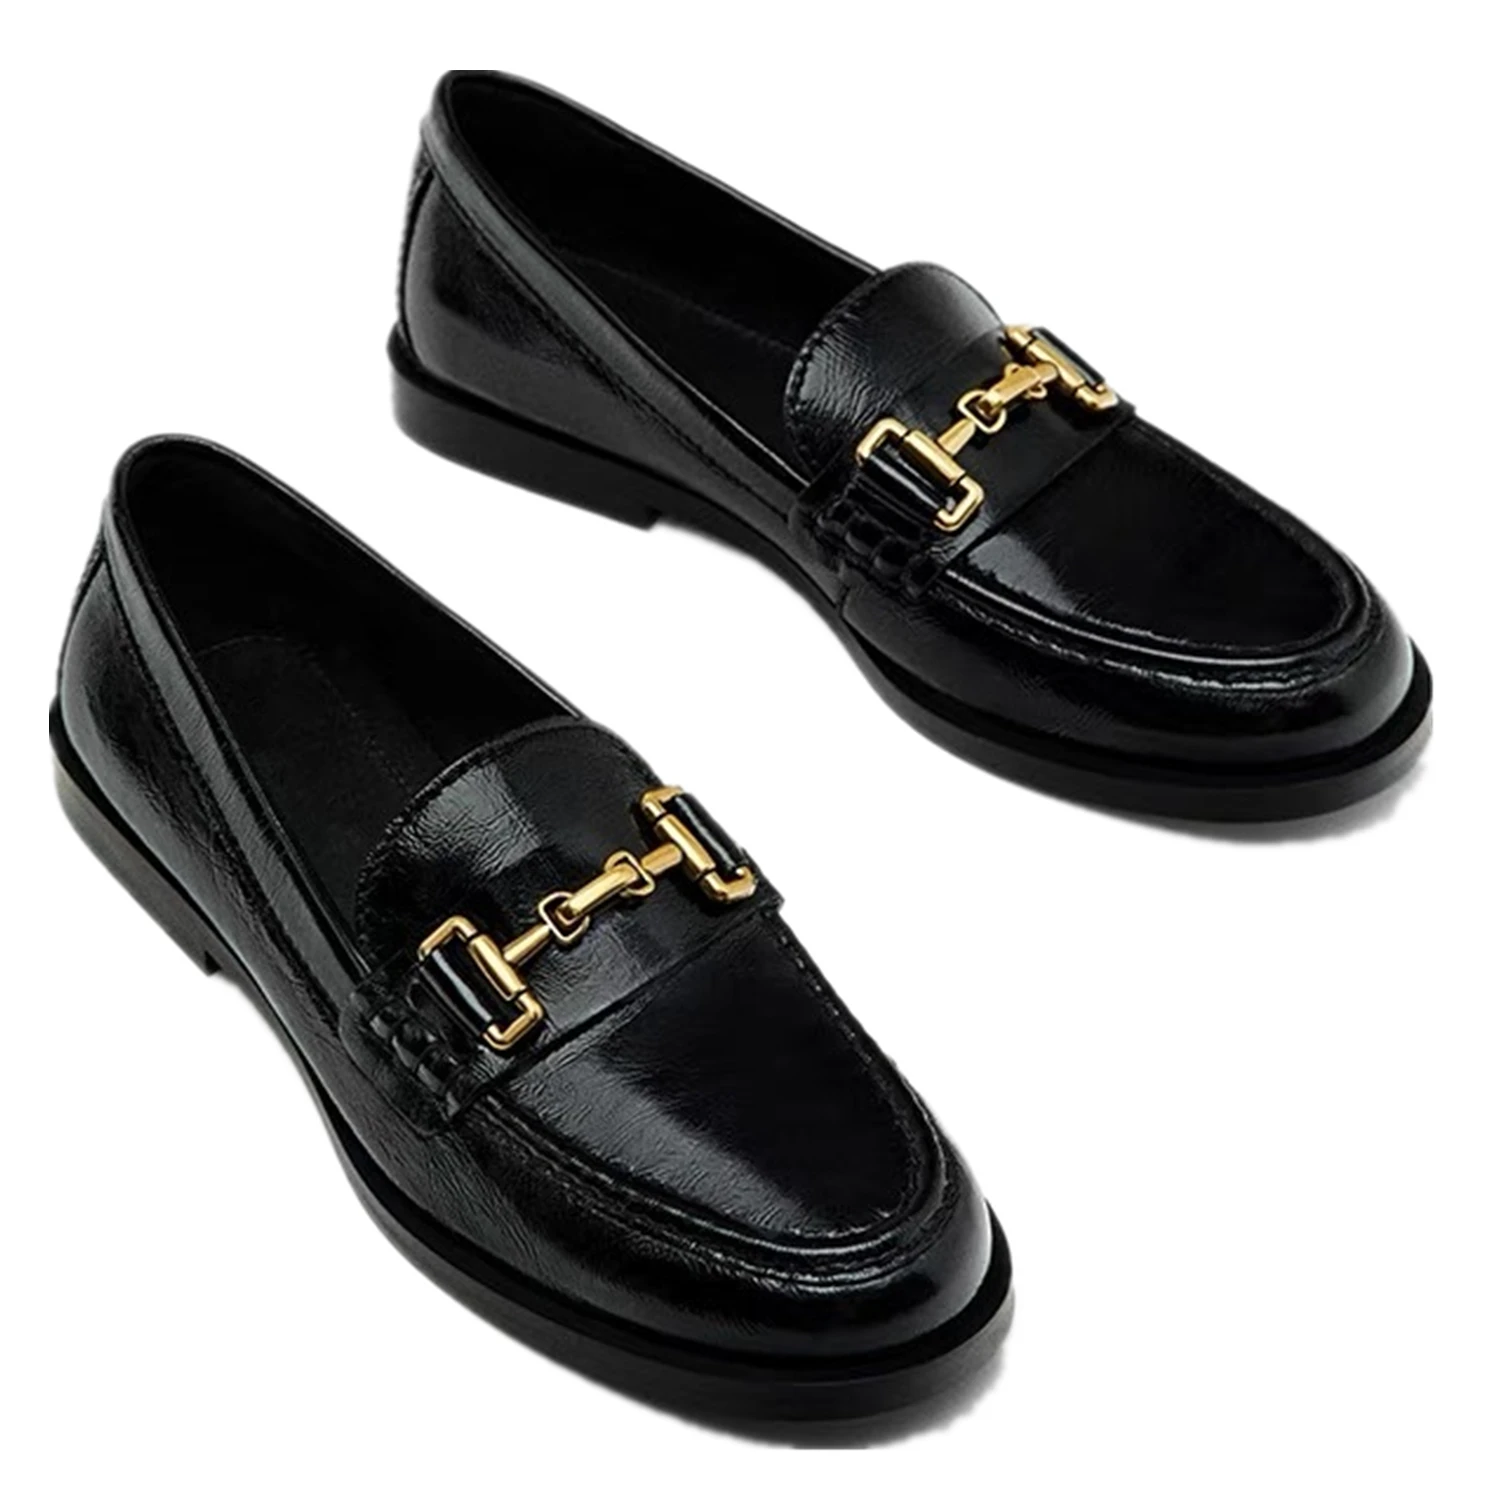 

Dave&Di Fashion Ladies Genuine Leather Gold Buckle Slip-On Loafers Elegant Casual Women Shoes Women'S Flat Shoes